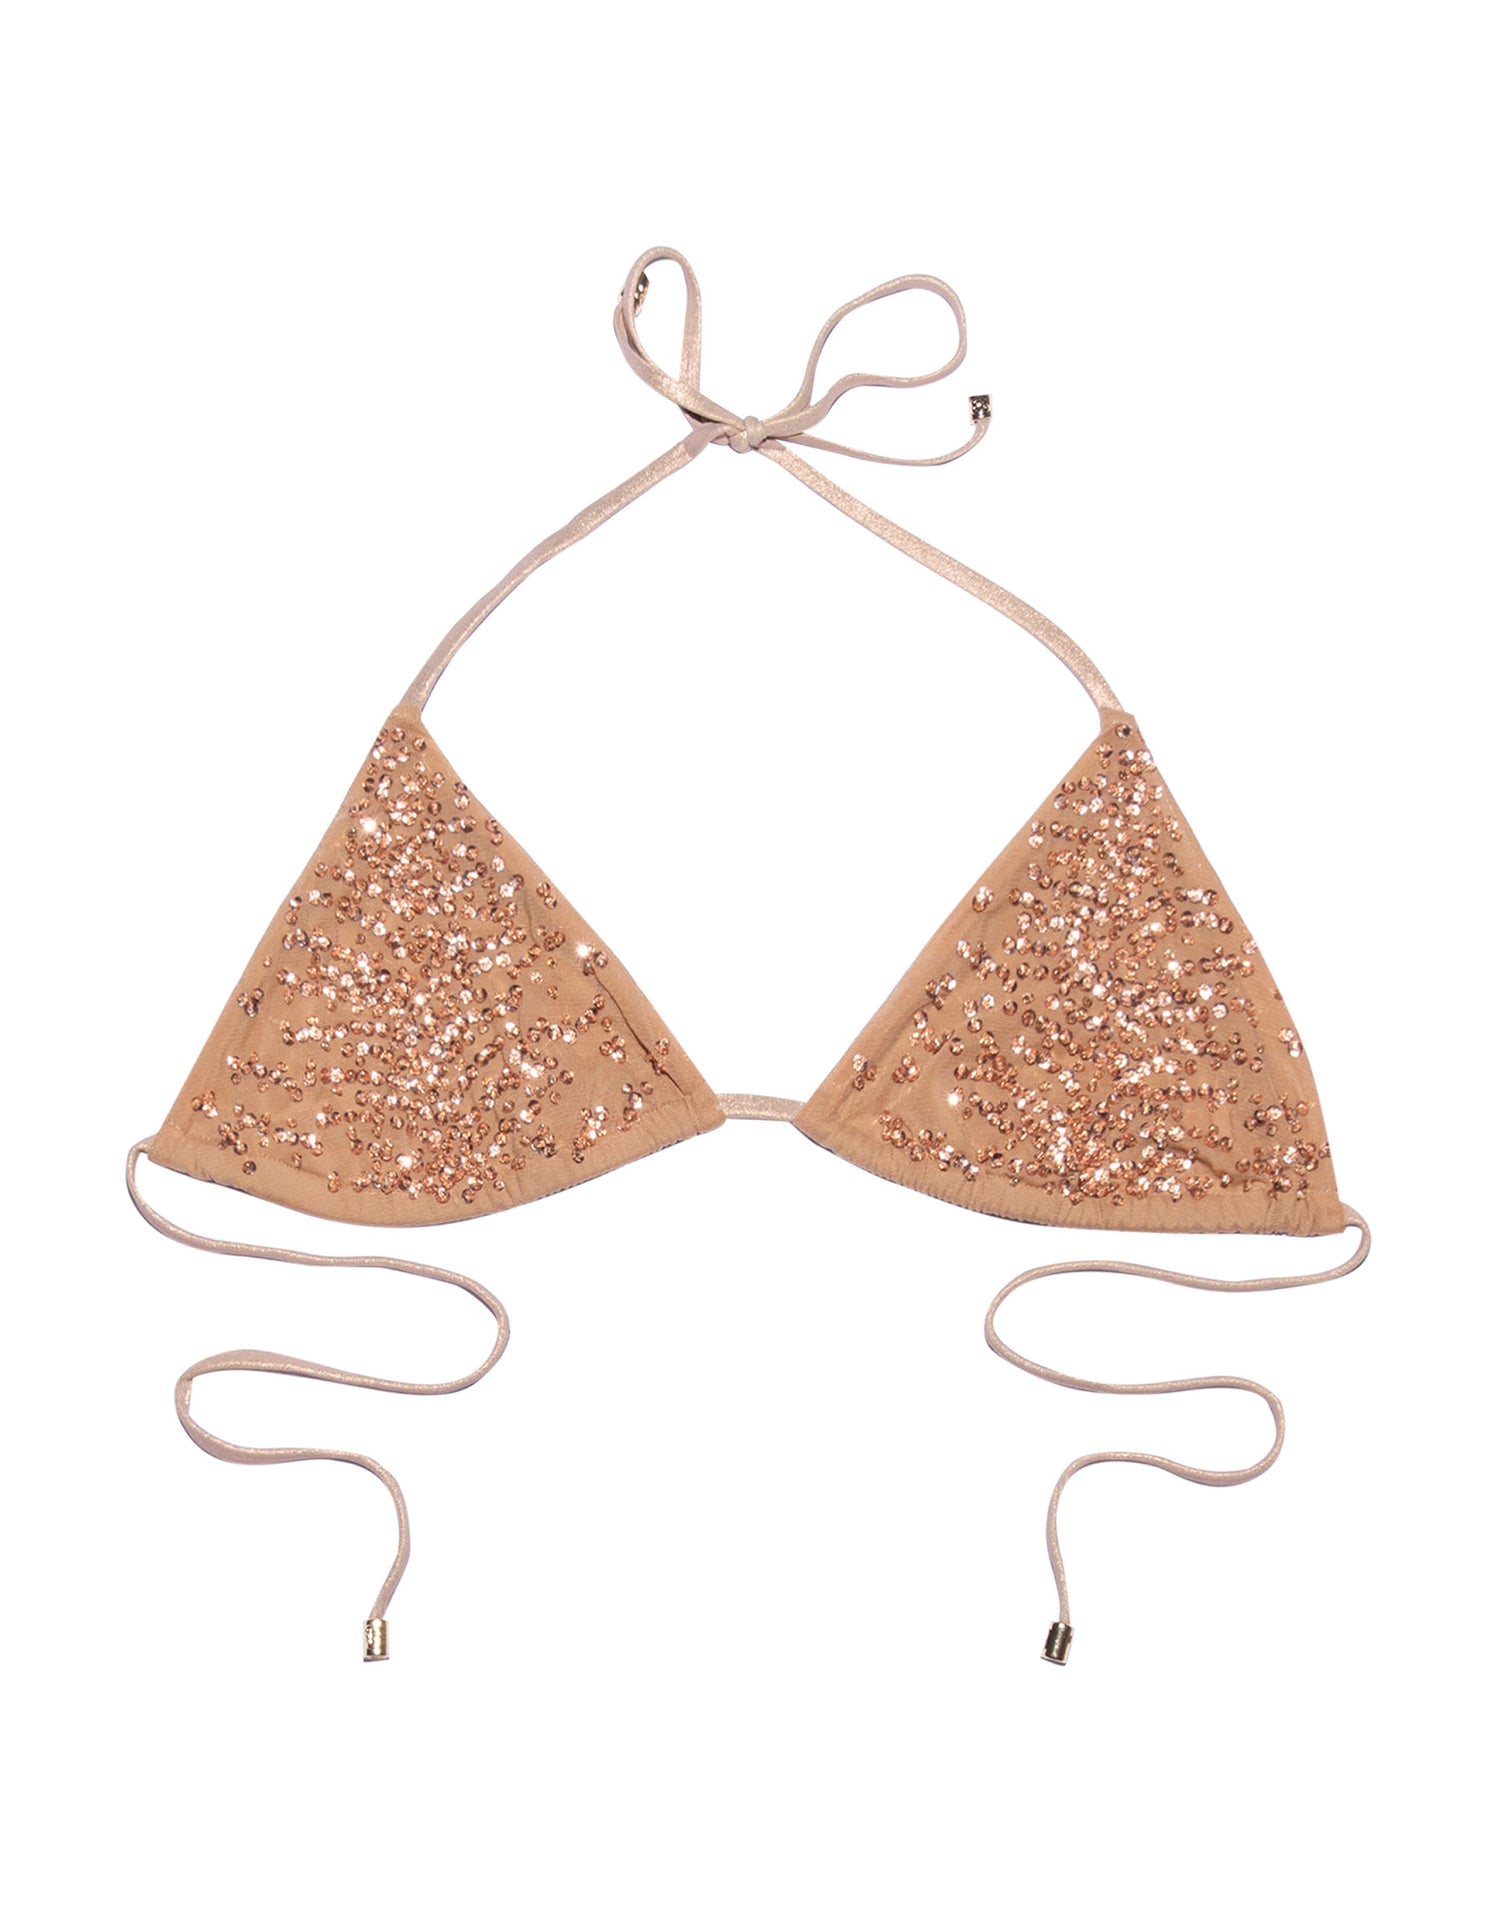 Nala Triangle Bikini Top in Rose Gold with Beads and Sequins - Product View 